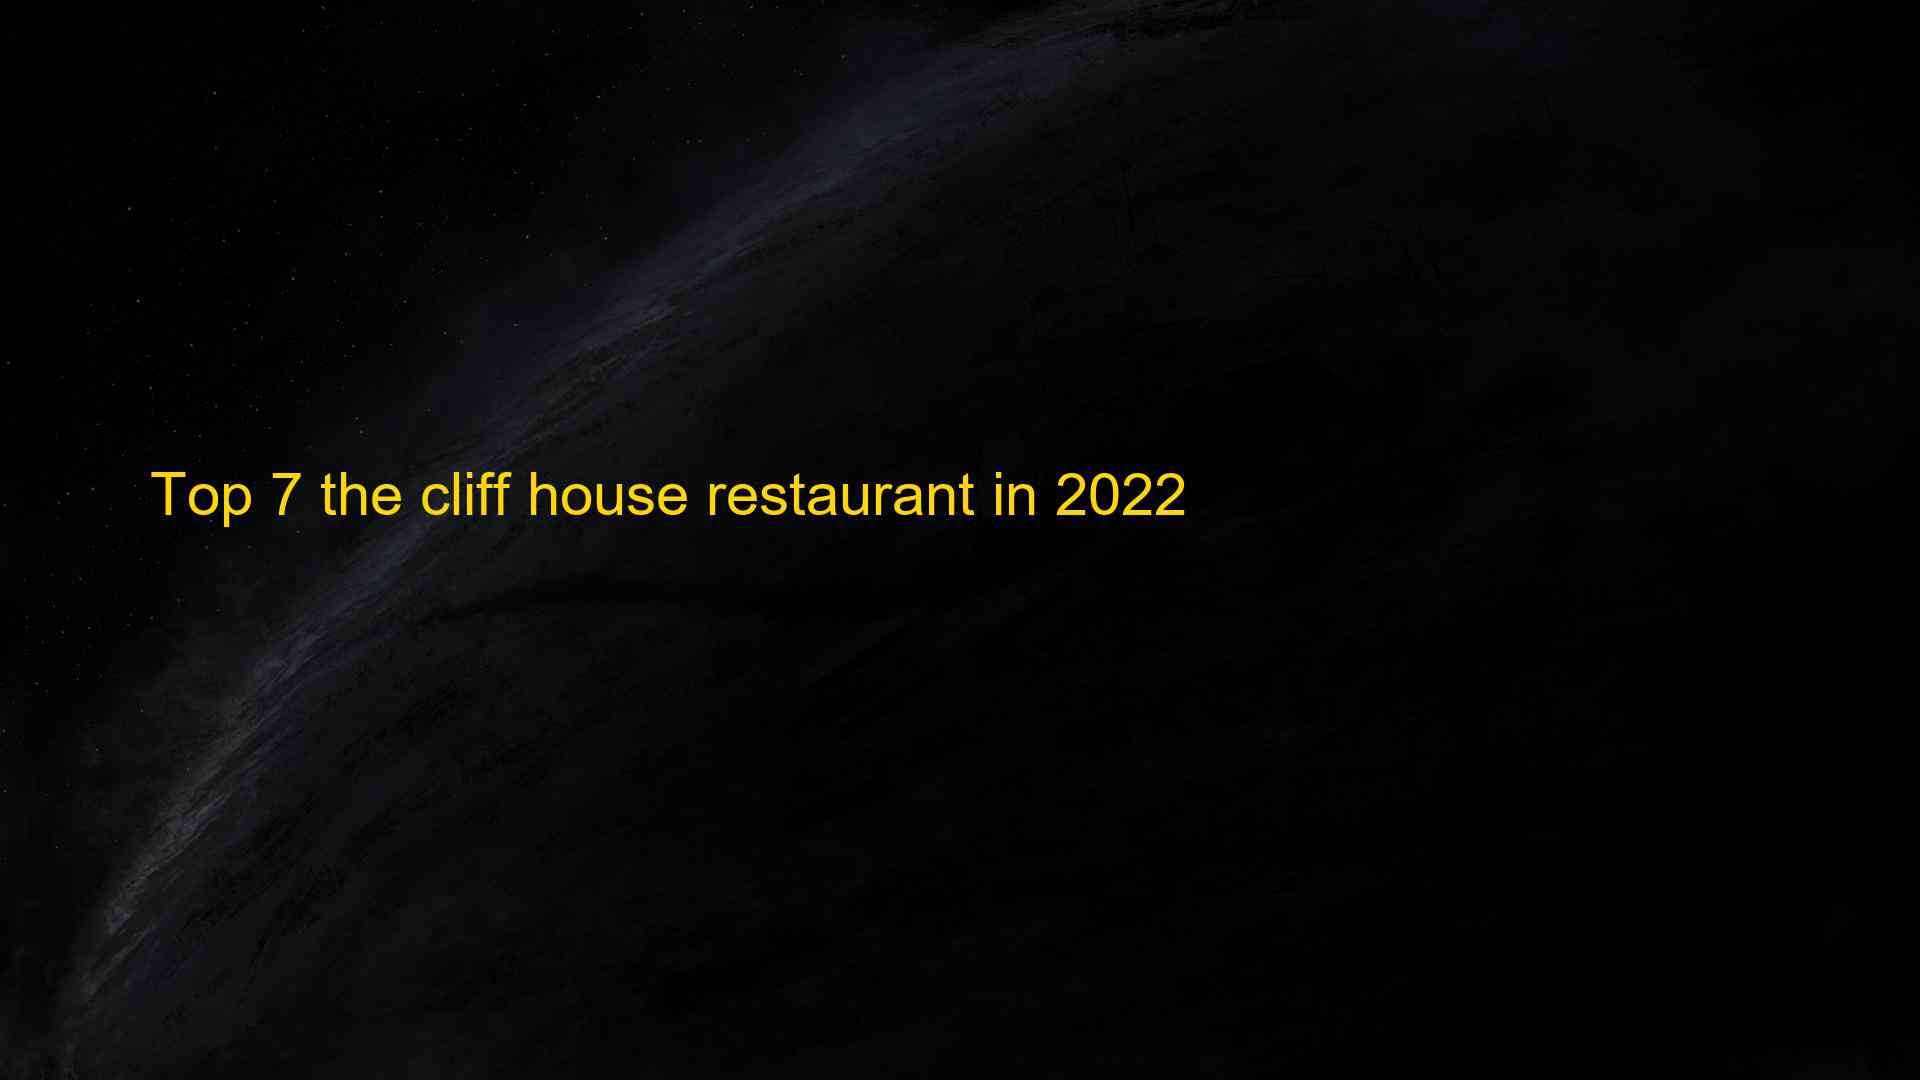 Top 7 the cliff house restaurant in 2022 1663525578